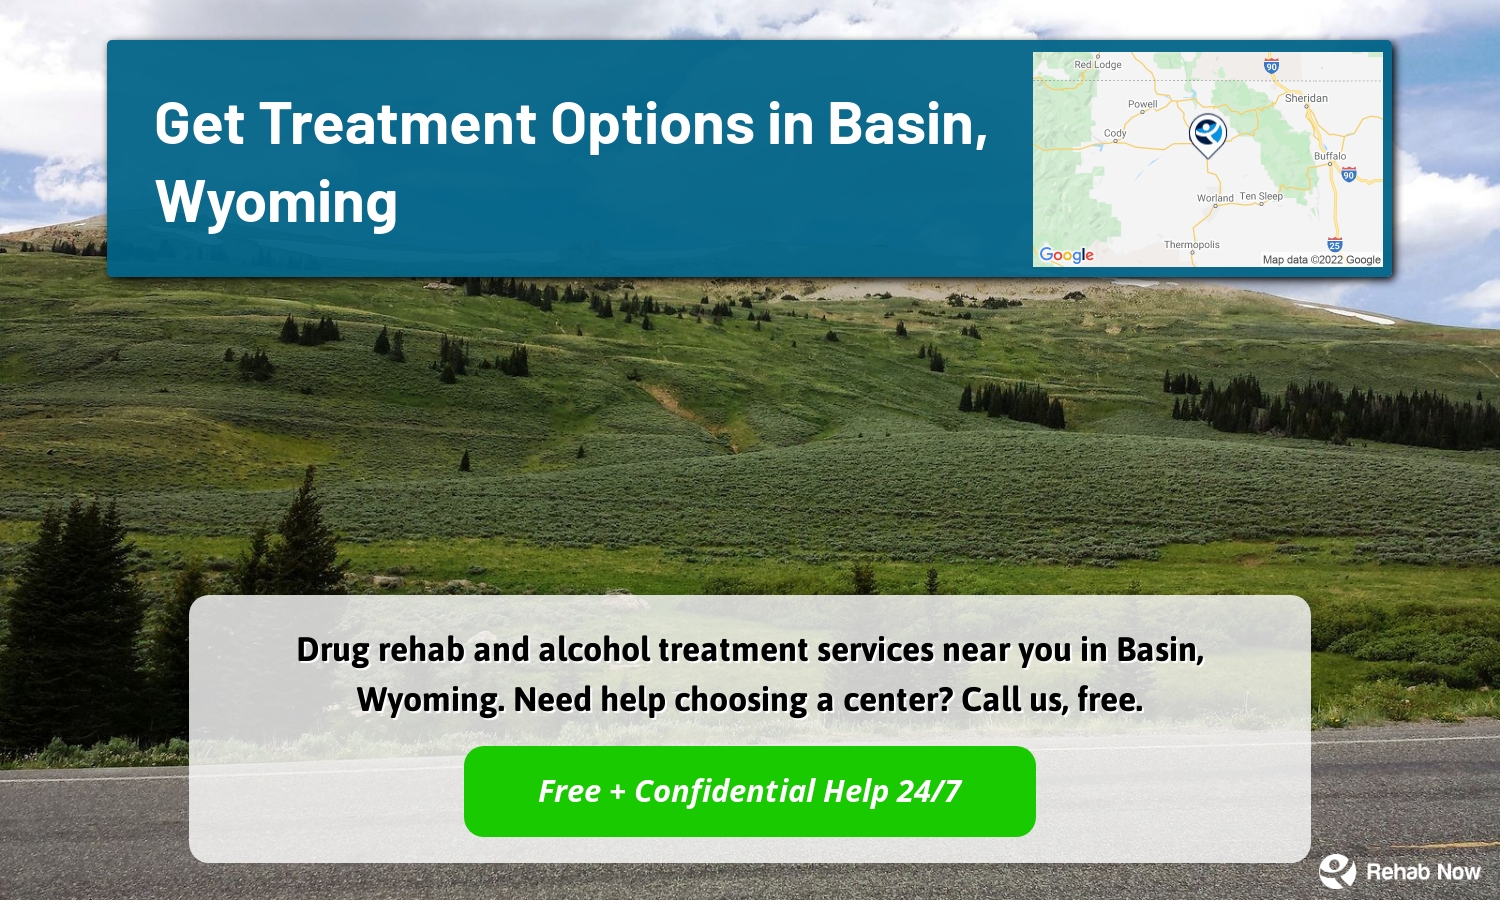 Drug rehab and alcohol treatment services near you in Basin, Wyoming. Need help choosing a center? Call us, free.